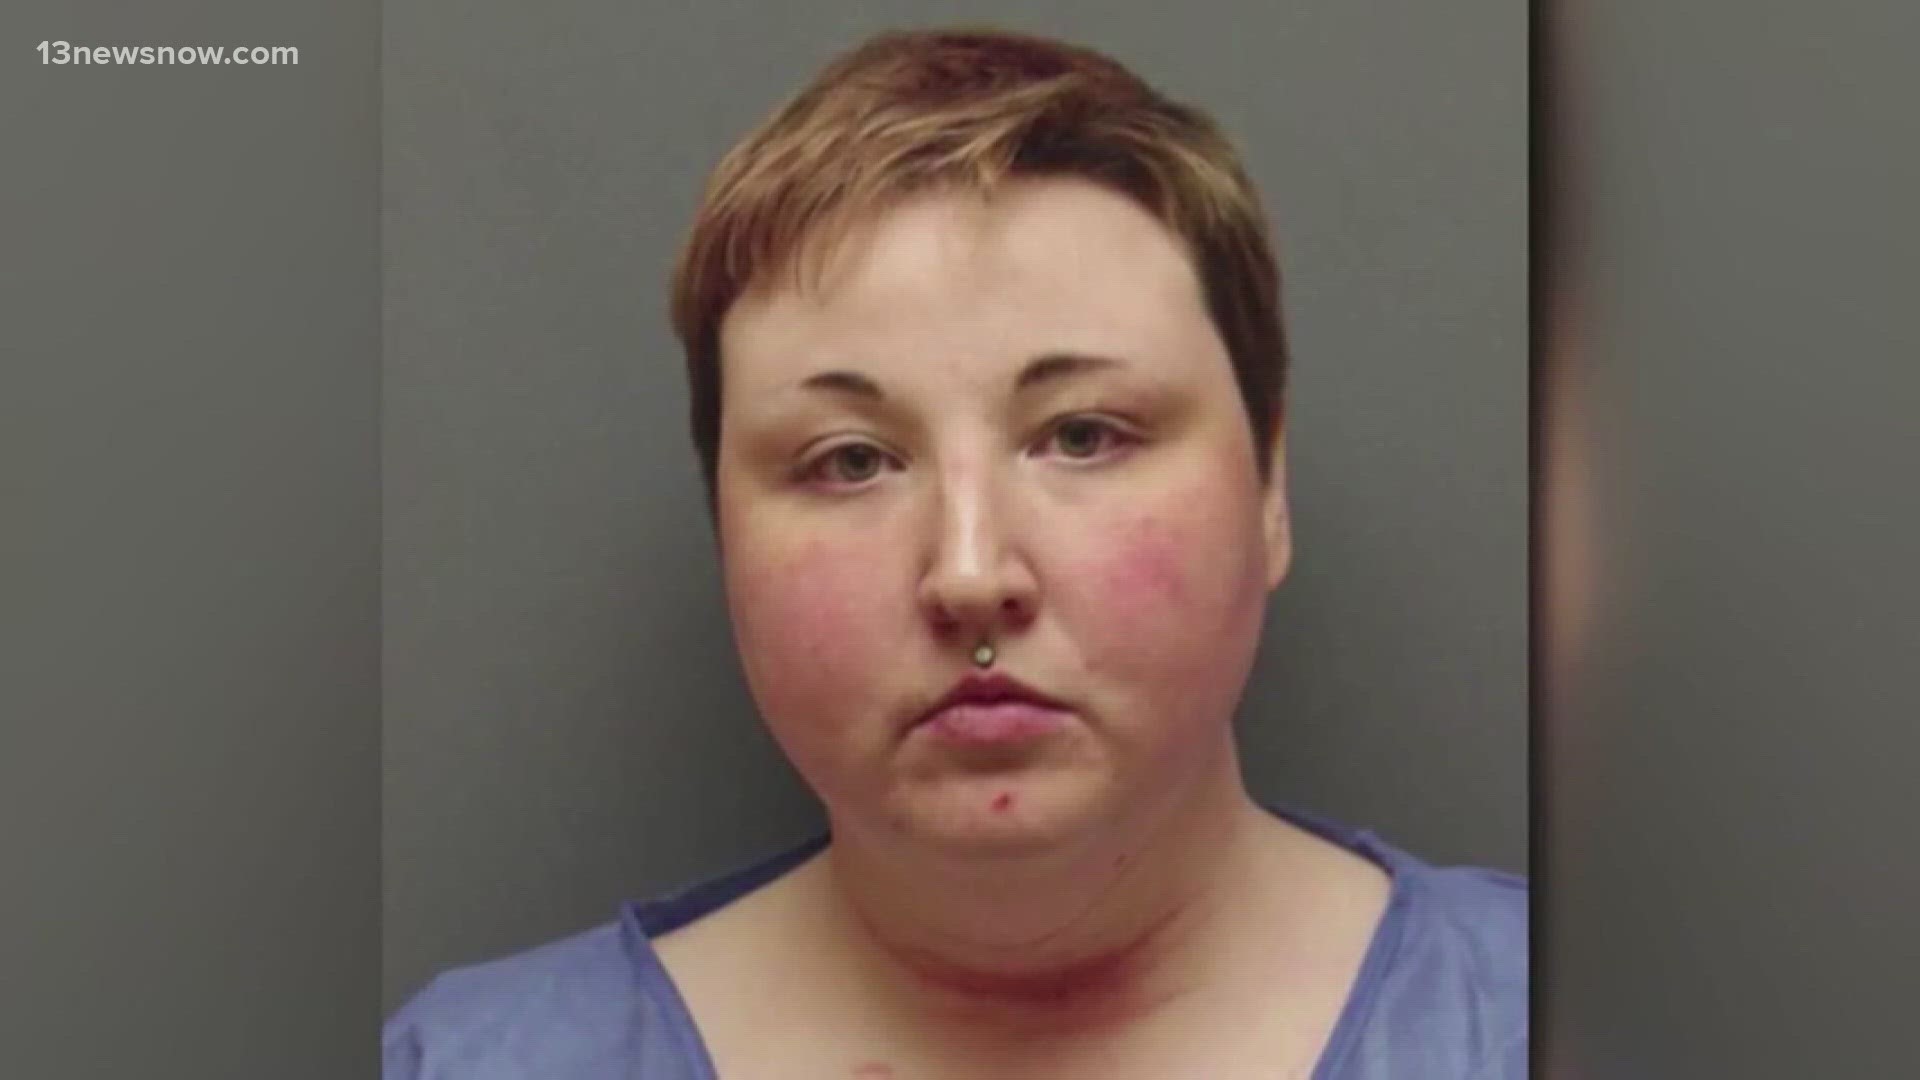 Sarah Ganoe pleaded guilty in June to several charges, including second-degree murder, child abuse and assault, according to online court documents.